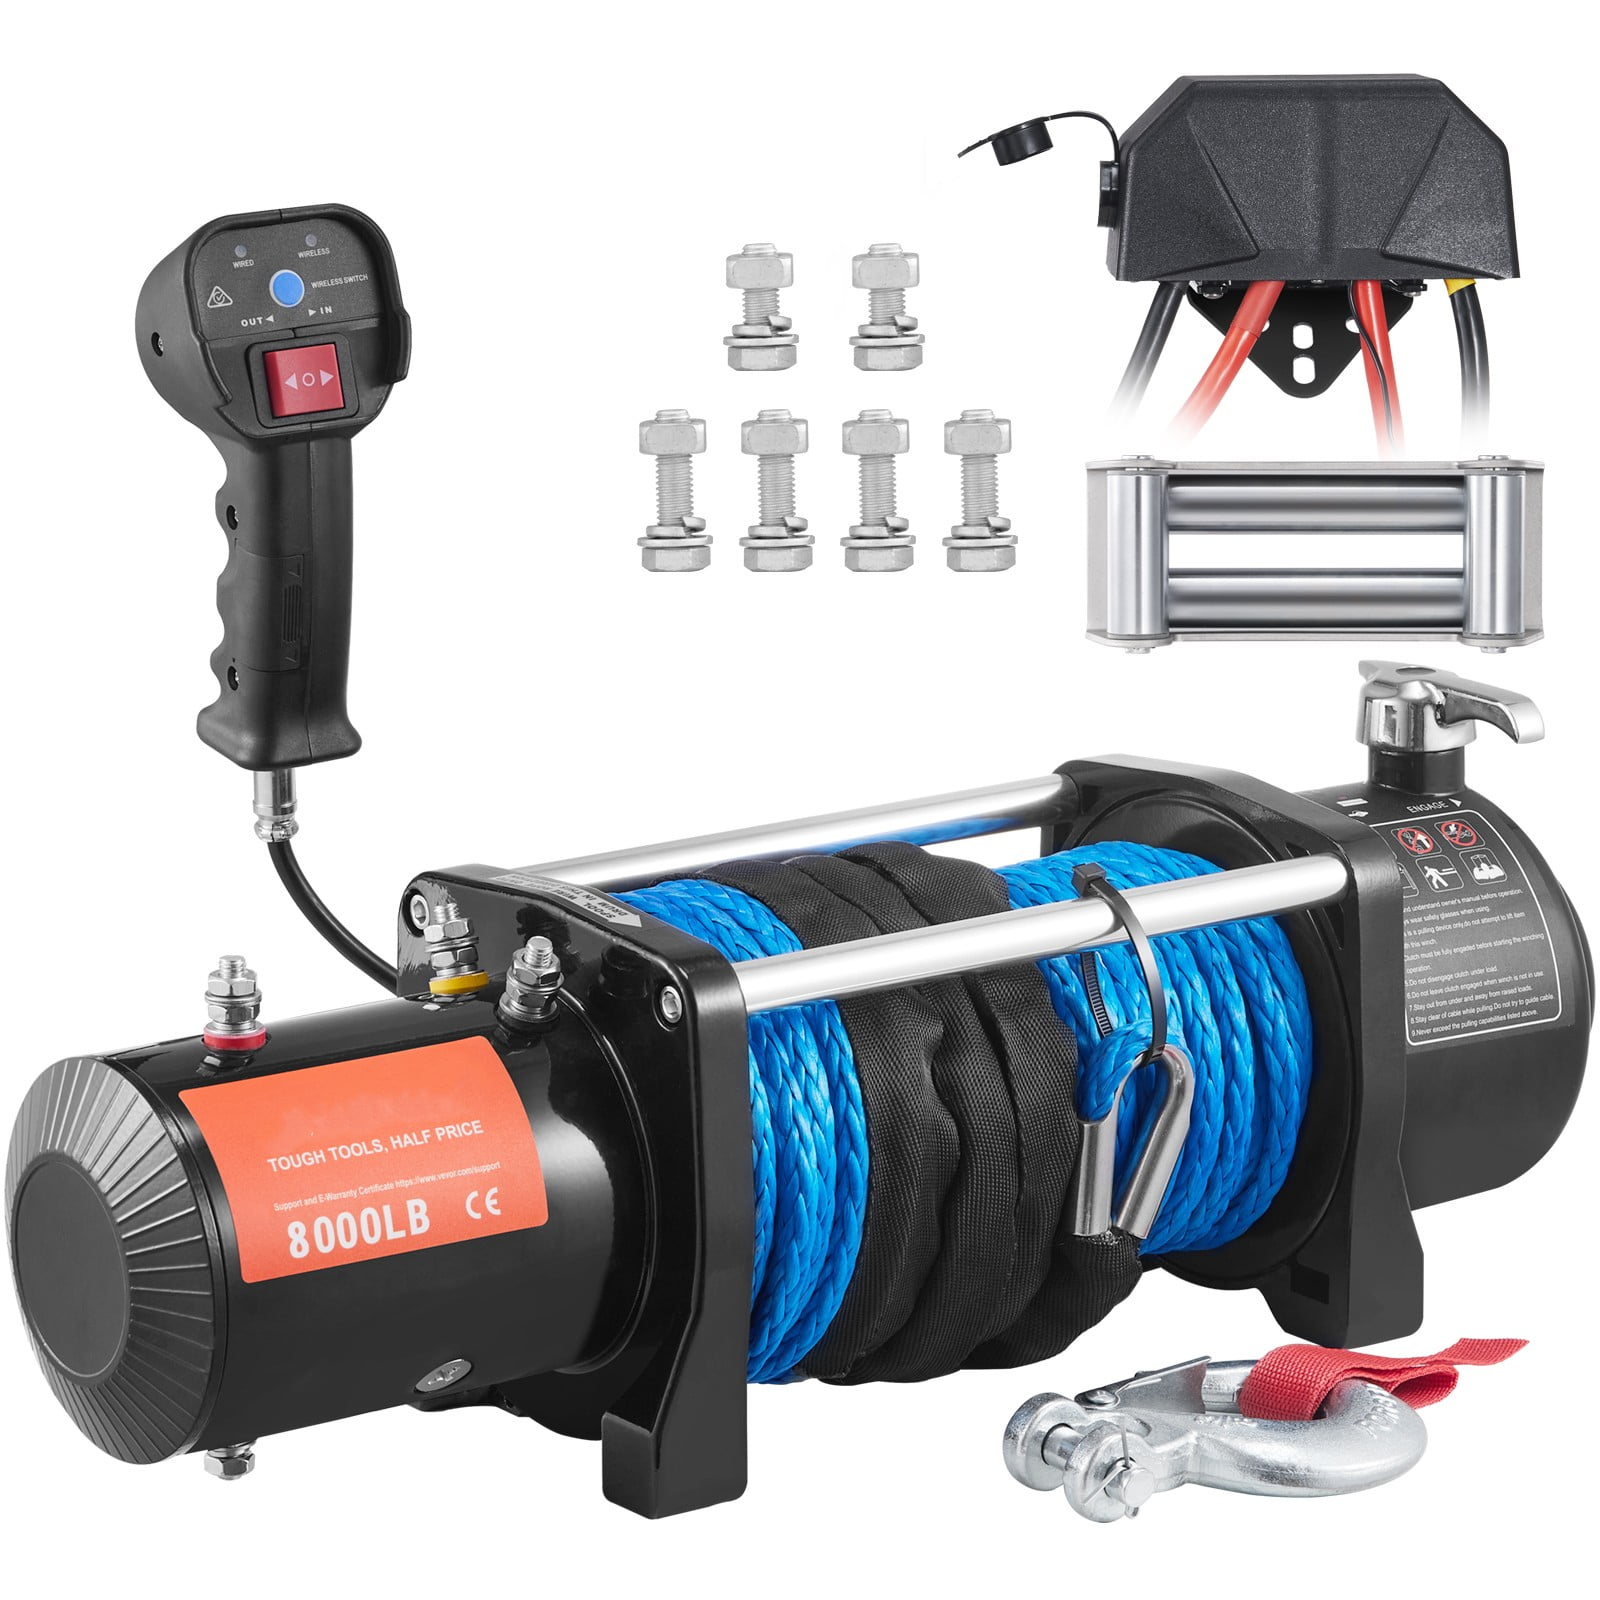 Bentism Electric Winch, 12V 8000 lb Load Capacity Nylon Rope Winch, IP67 85ft ATV Winch with Wireless Handheld Remote, Size: 8000 lbs